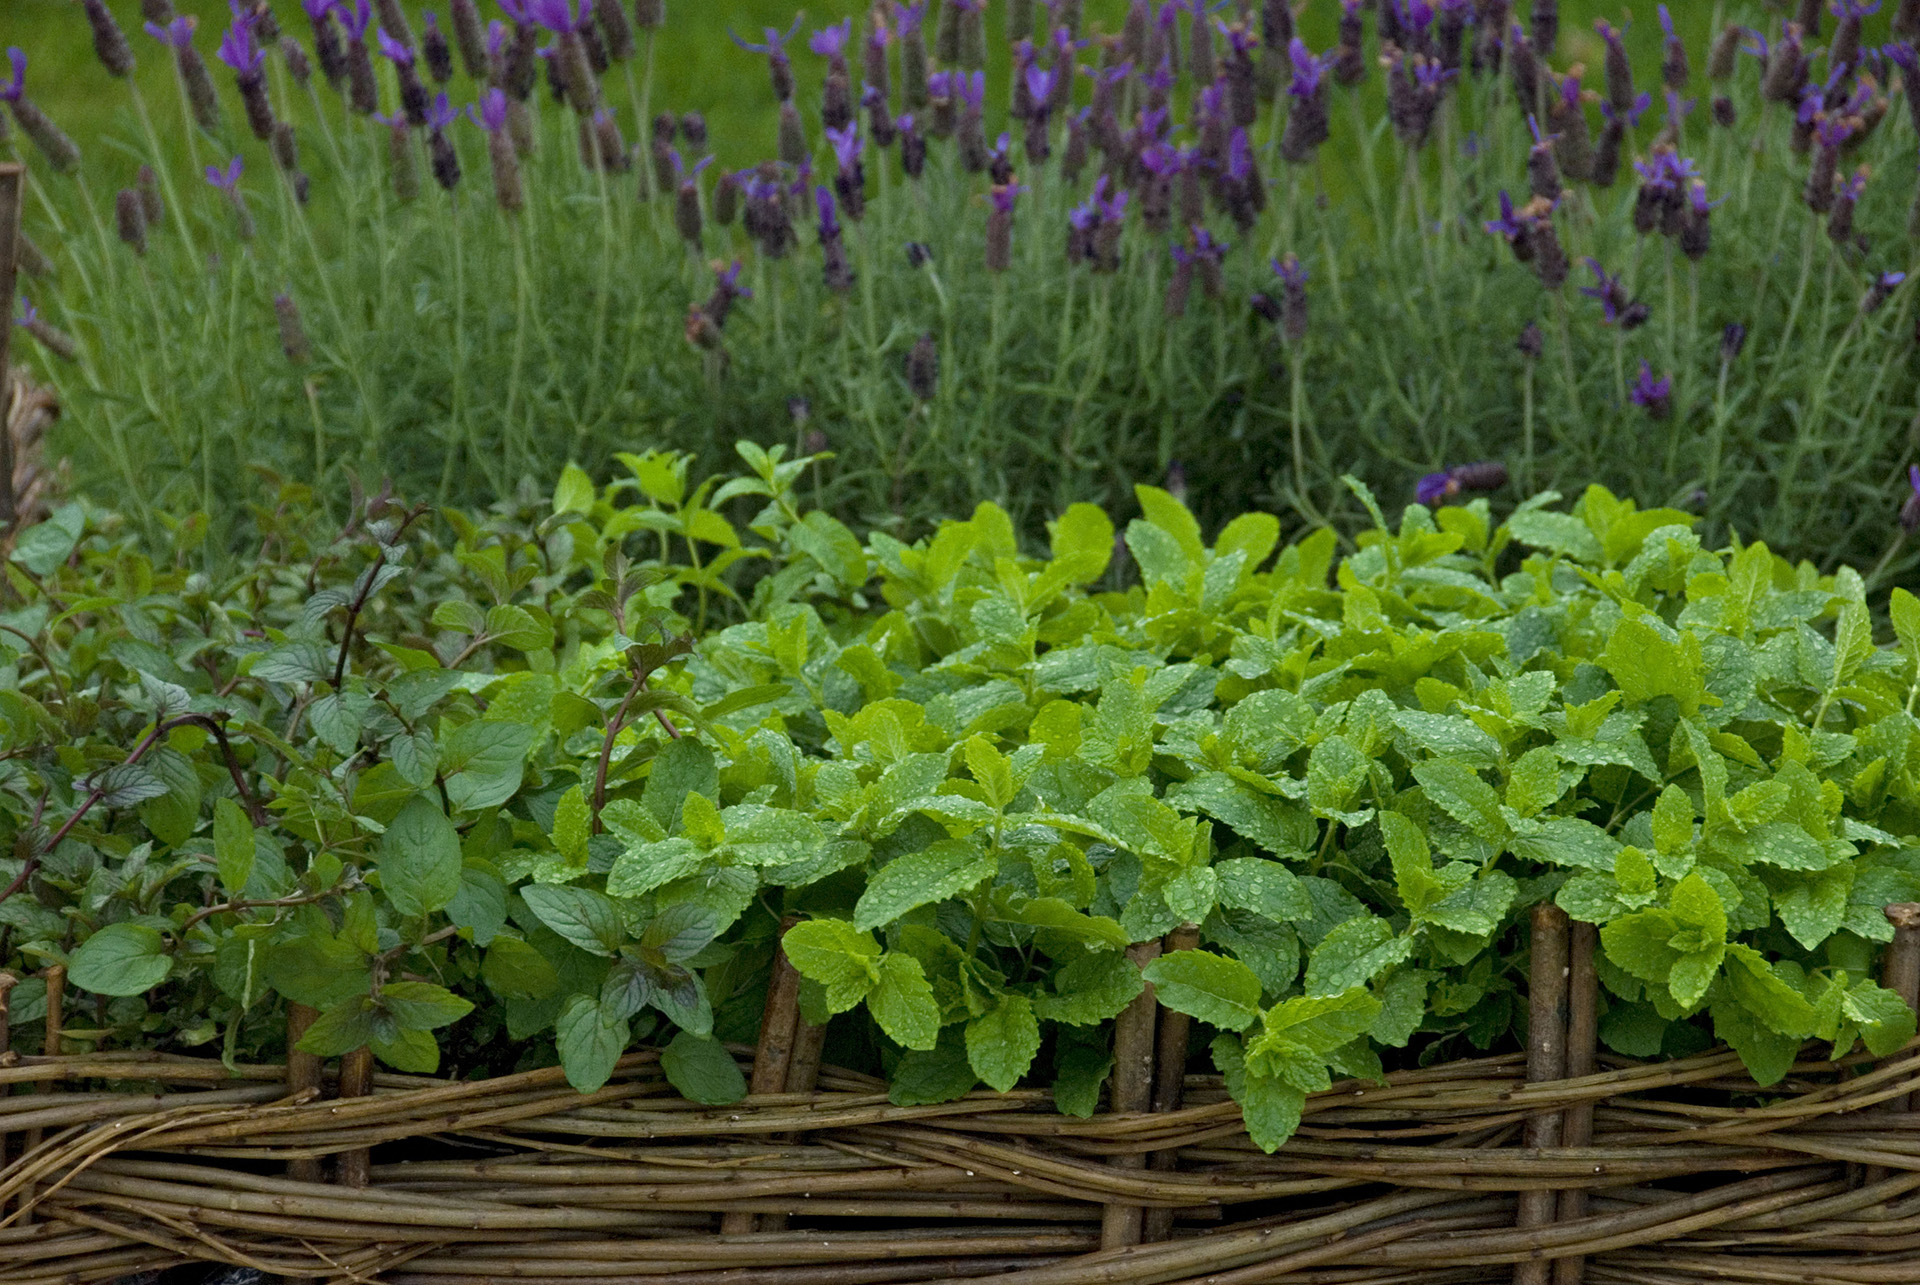 9 Good Reasons to Grow a Mint Plant - On Sutton Place